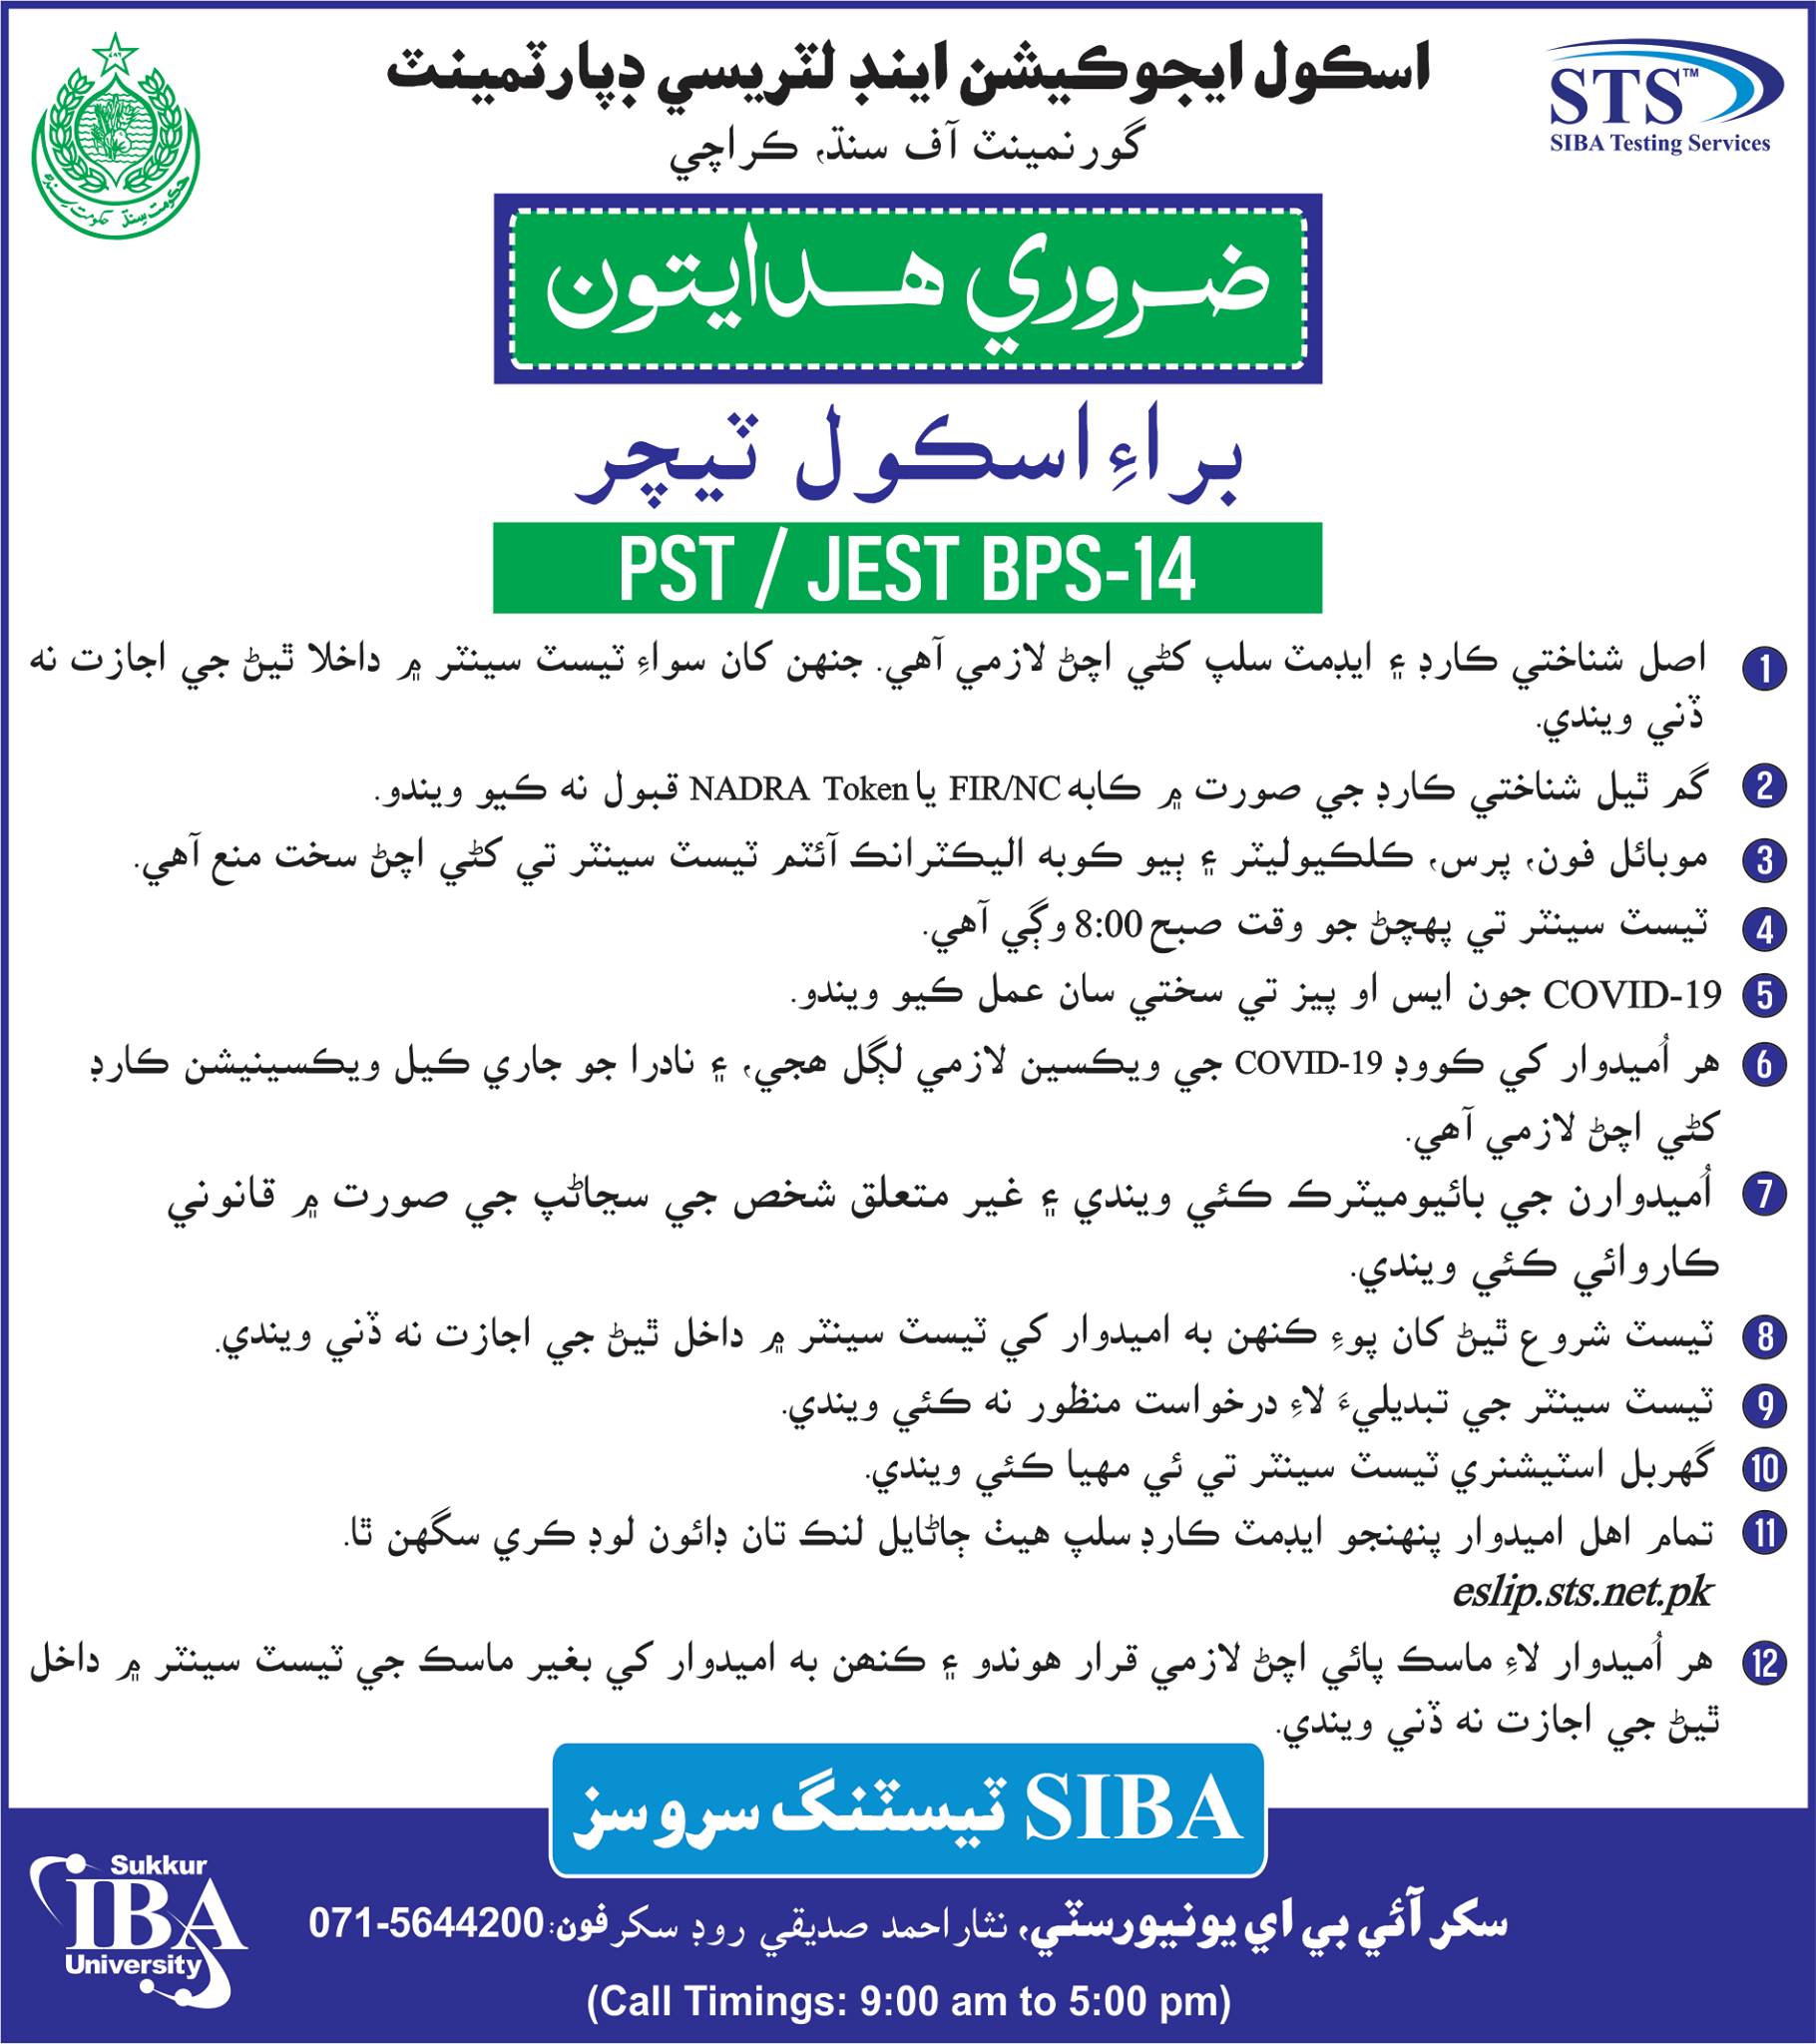 SOPs/Important Instructions for the candidates of JEST & PST @ School Education & Literacy Department, Government of Sindh. Further, the test dates will be announced soon.